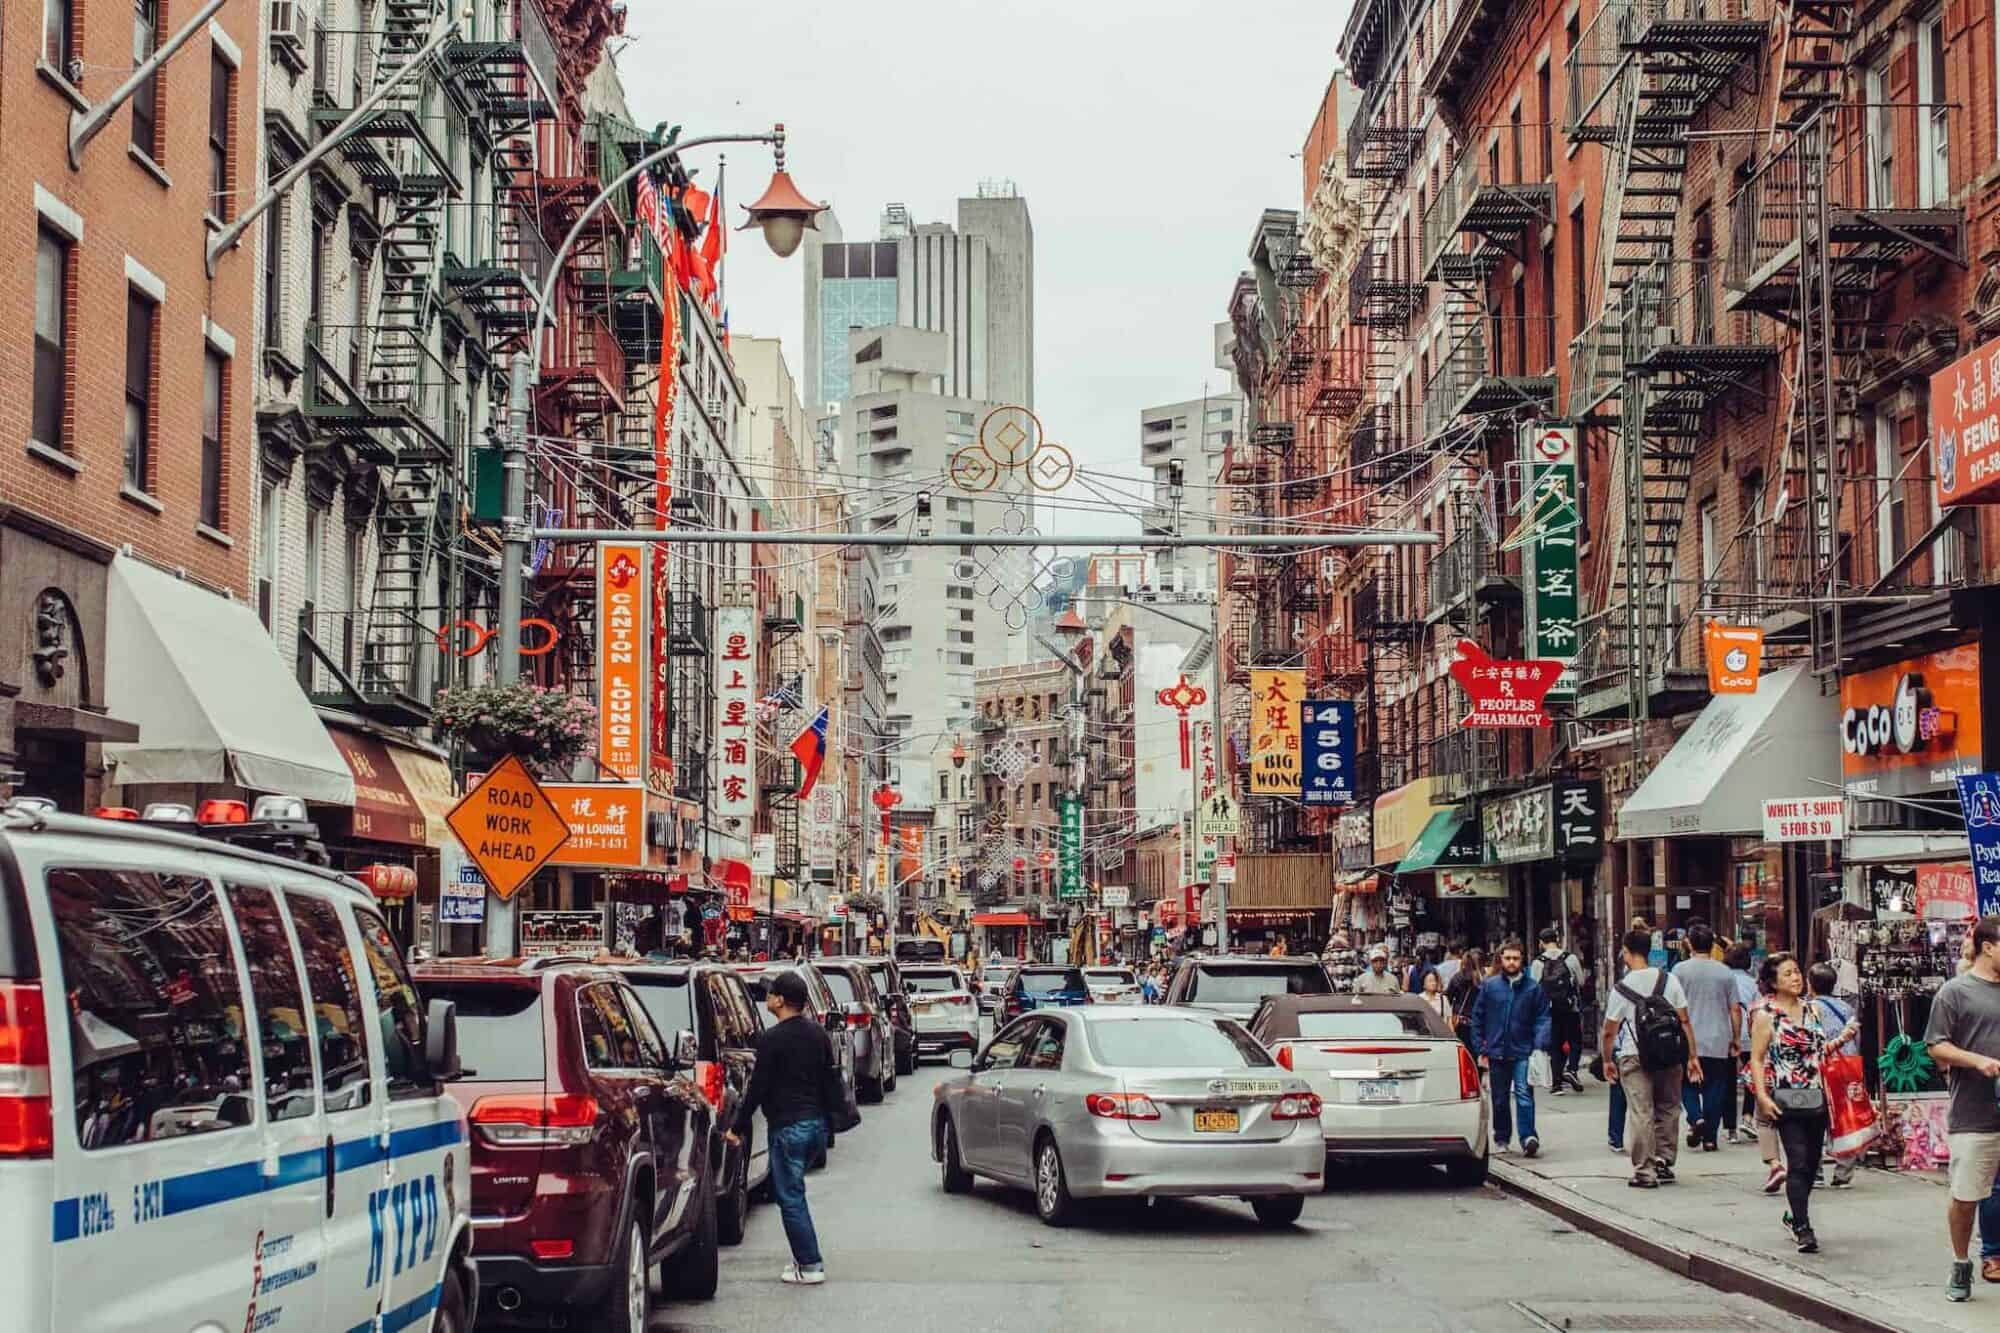 A busy New York street in the heart of Chinatown with a greay car driving off, and a row of parked cars and a line of traffic.